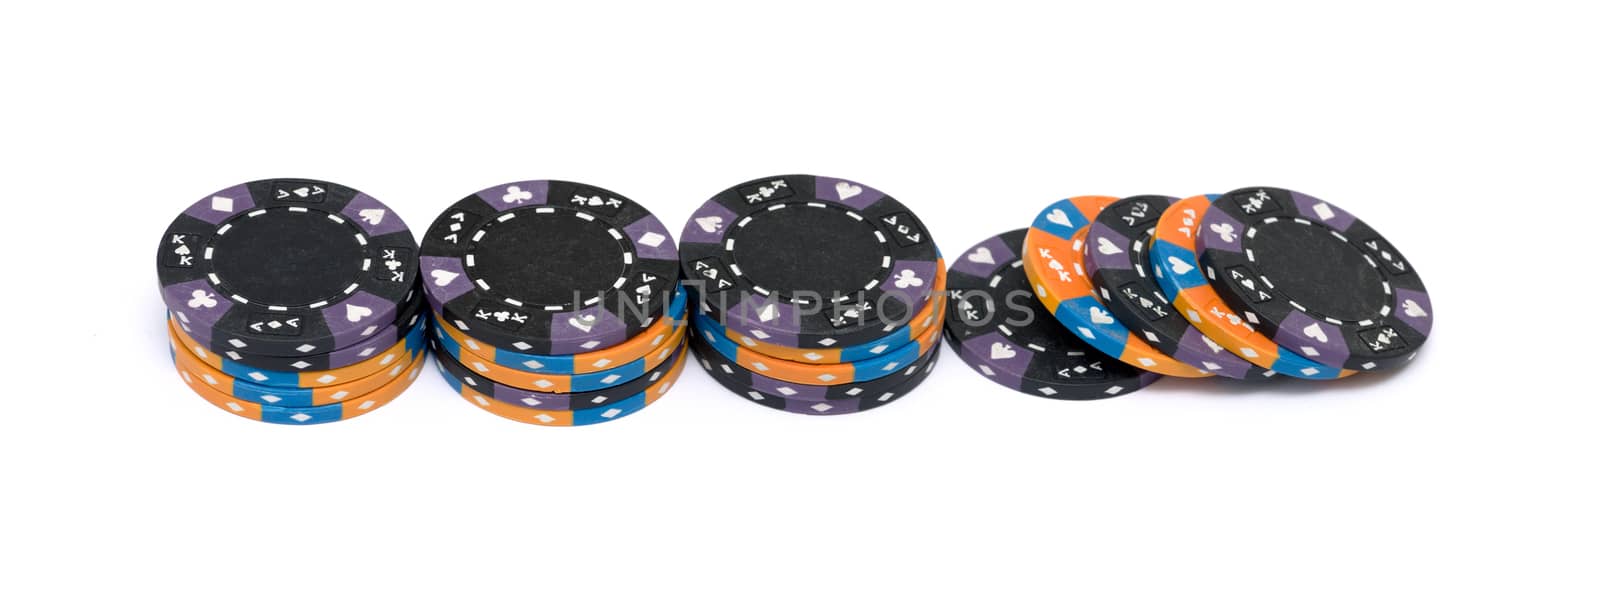 The casino chips isolated on white background